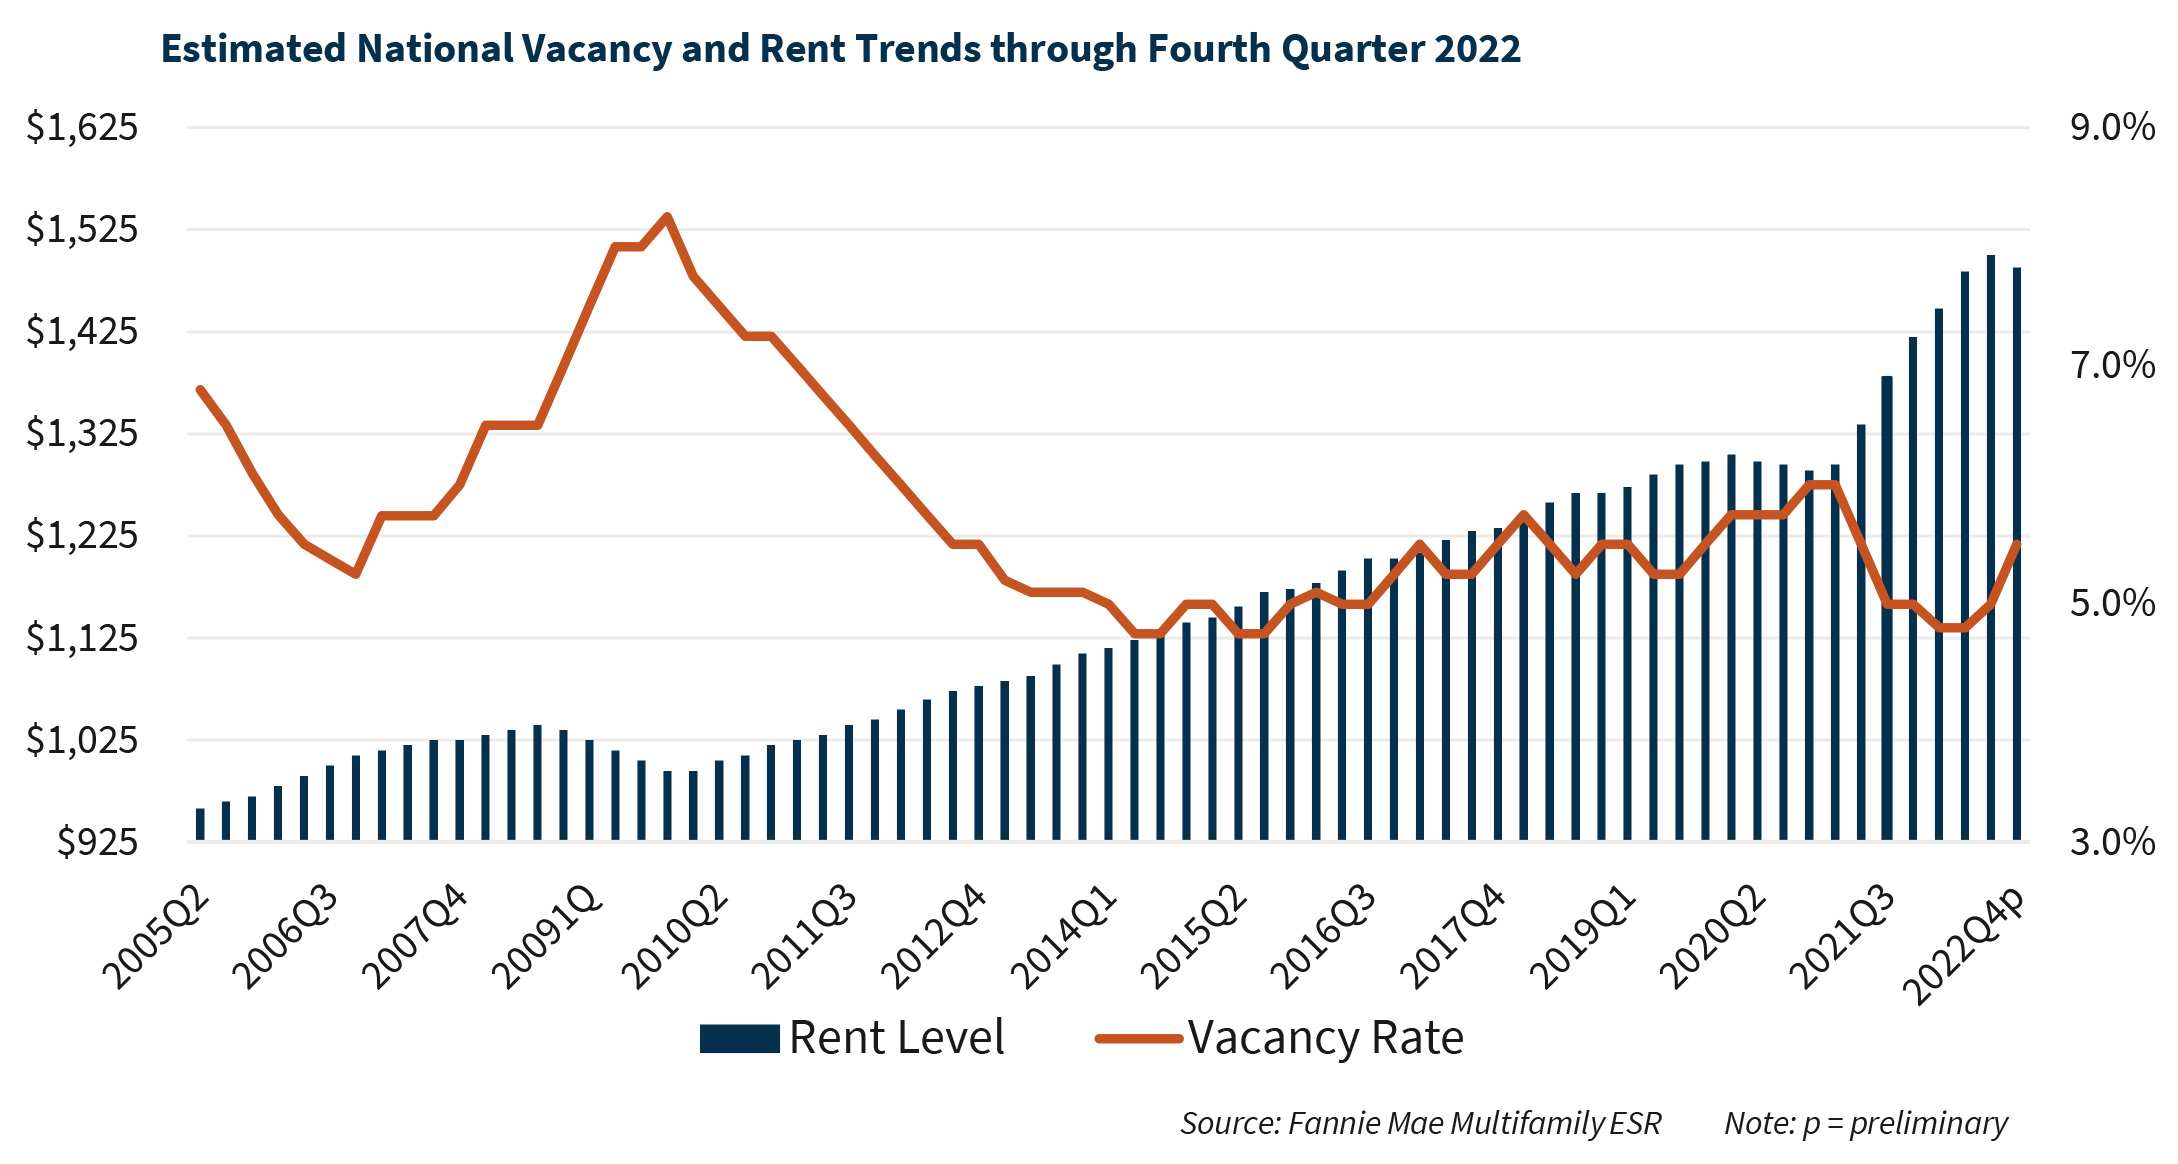 Estimated National Vacancy and Rent Trends through Fourth Quarter 2022